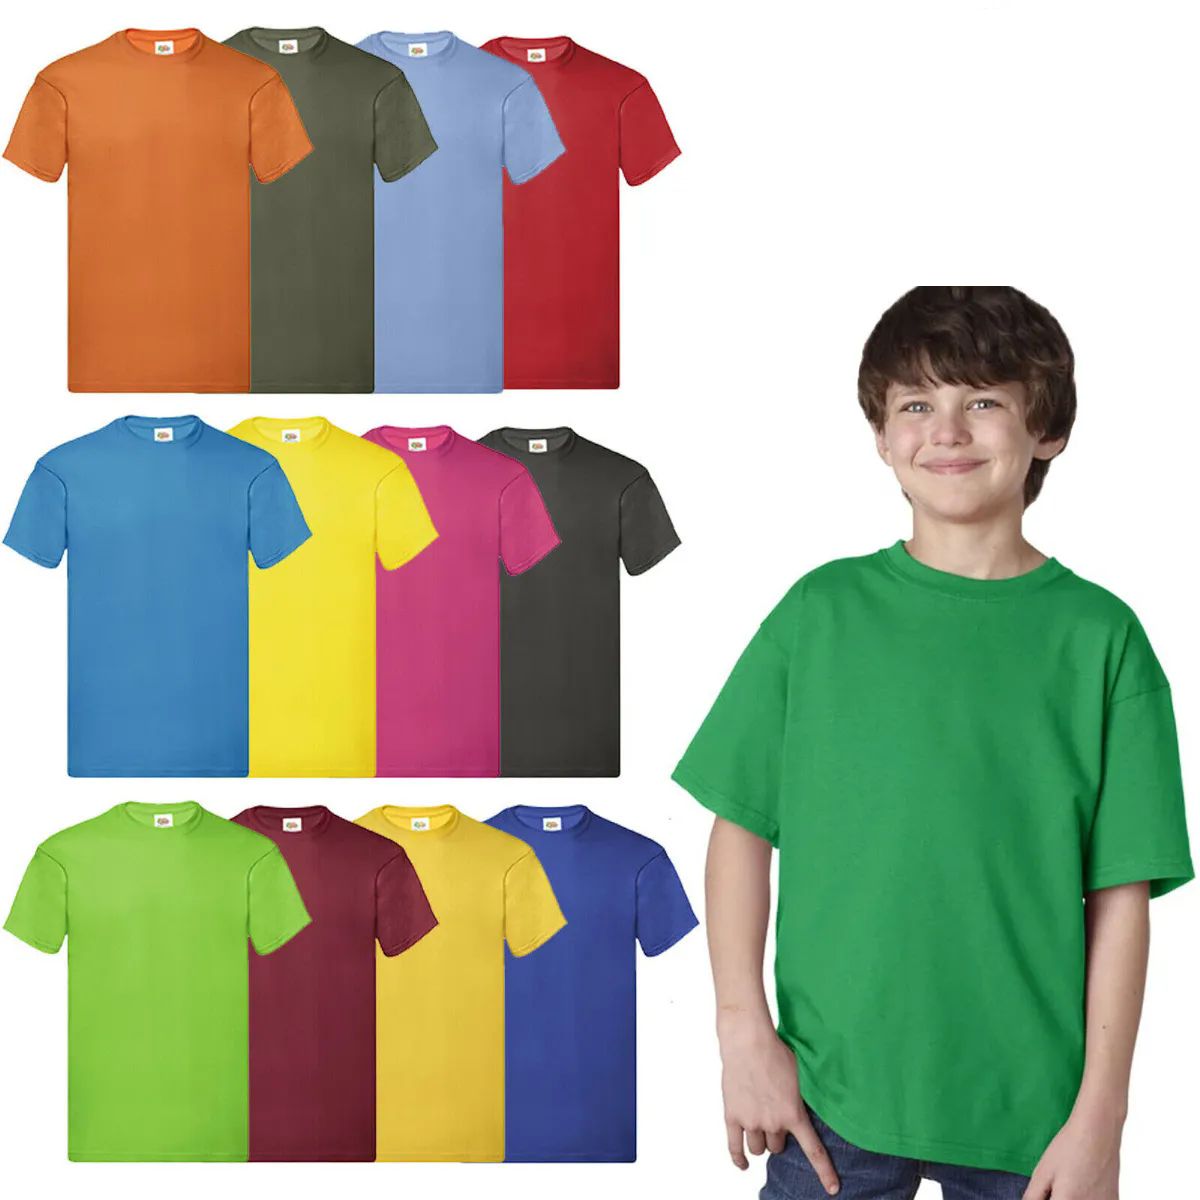 288 Pieces of Billion Hats Kids Youth Cotton Assorted Colors T Shirts Size xs